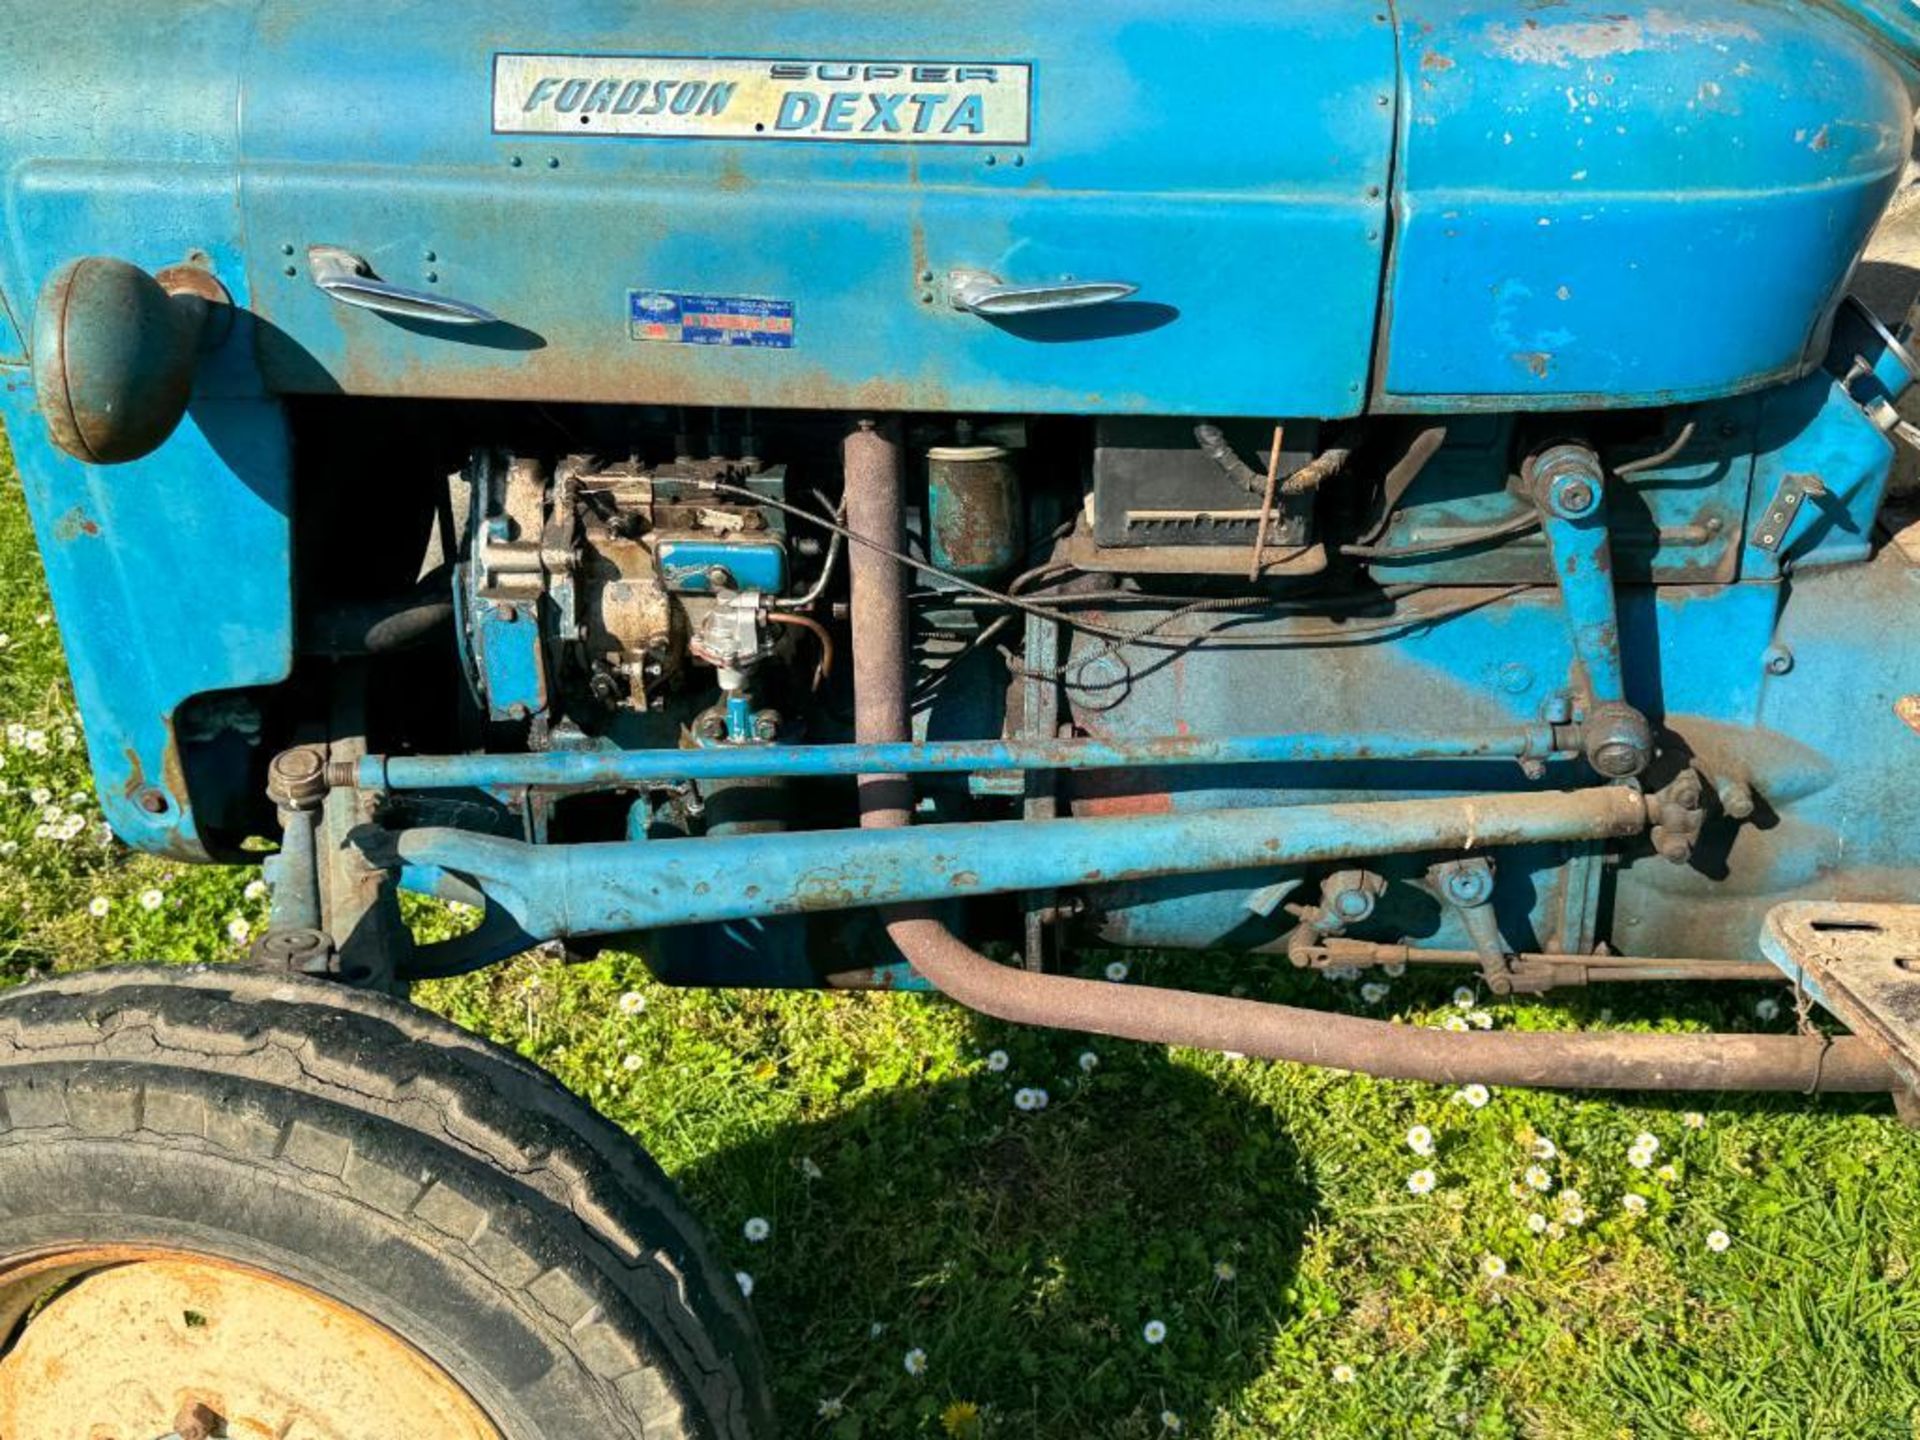 Fordson Super Dexta 2wd diesel tractor with rear linkage, PTO and underslung exhaust on 12.4-28 rear - Image 13 of 15